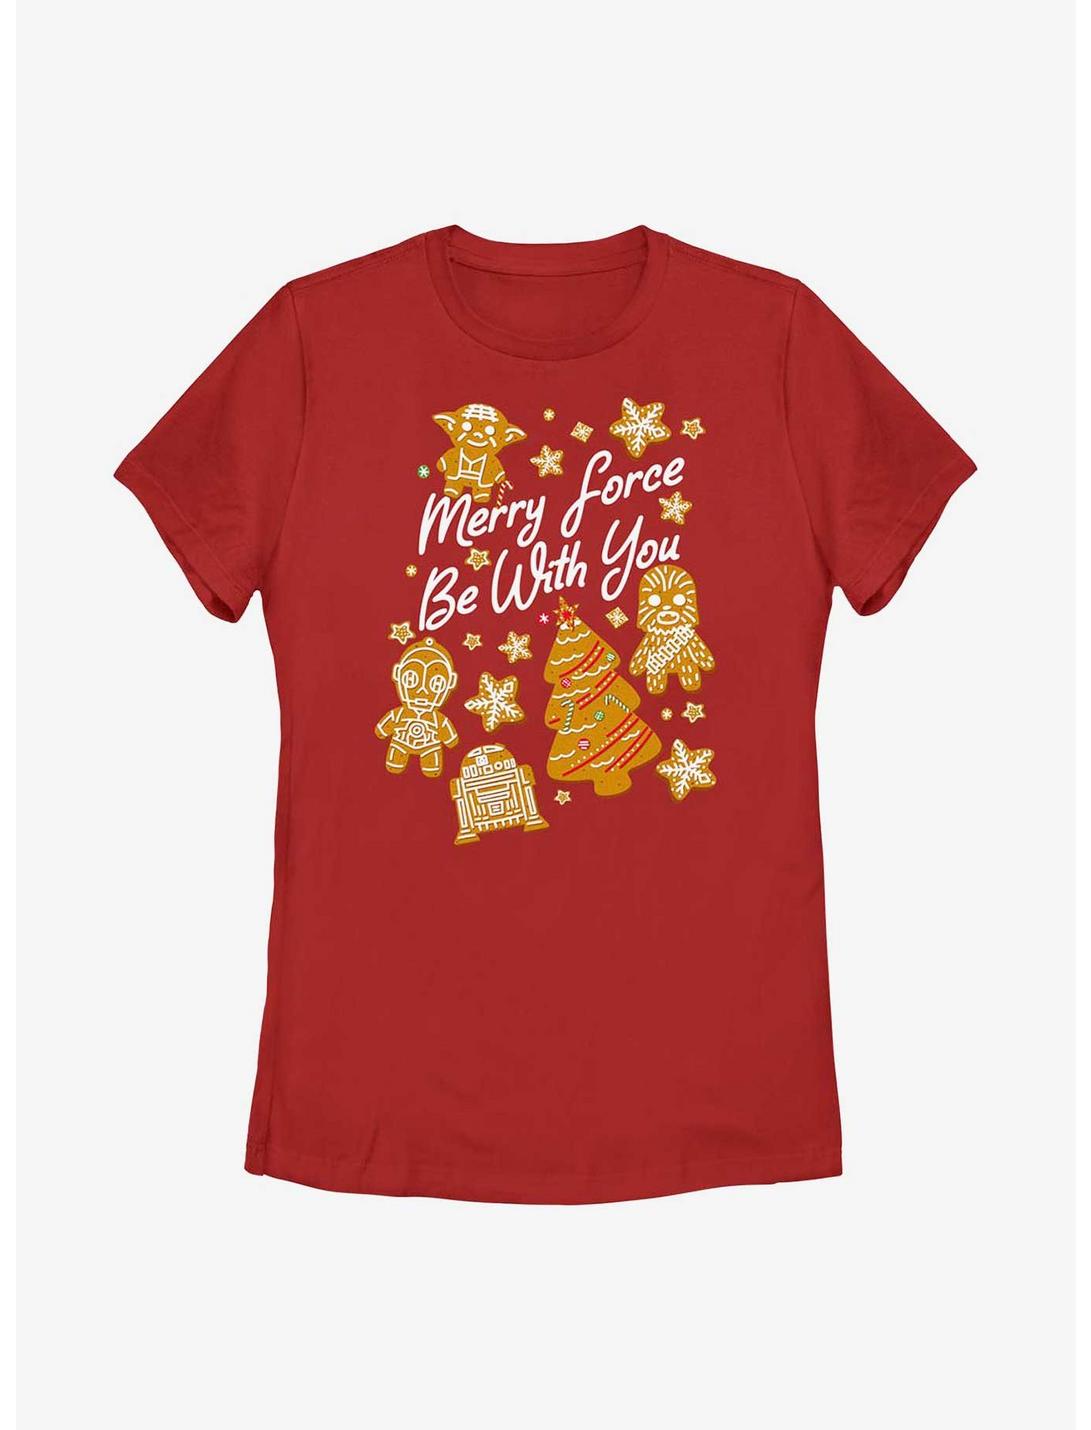 Star Wars Merry Force Be With You Cookies Womens T-Shirt, RED, hi-res